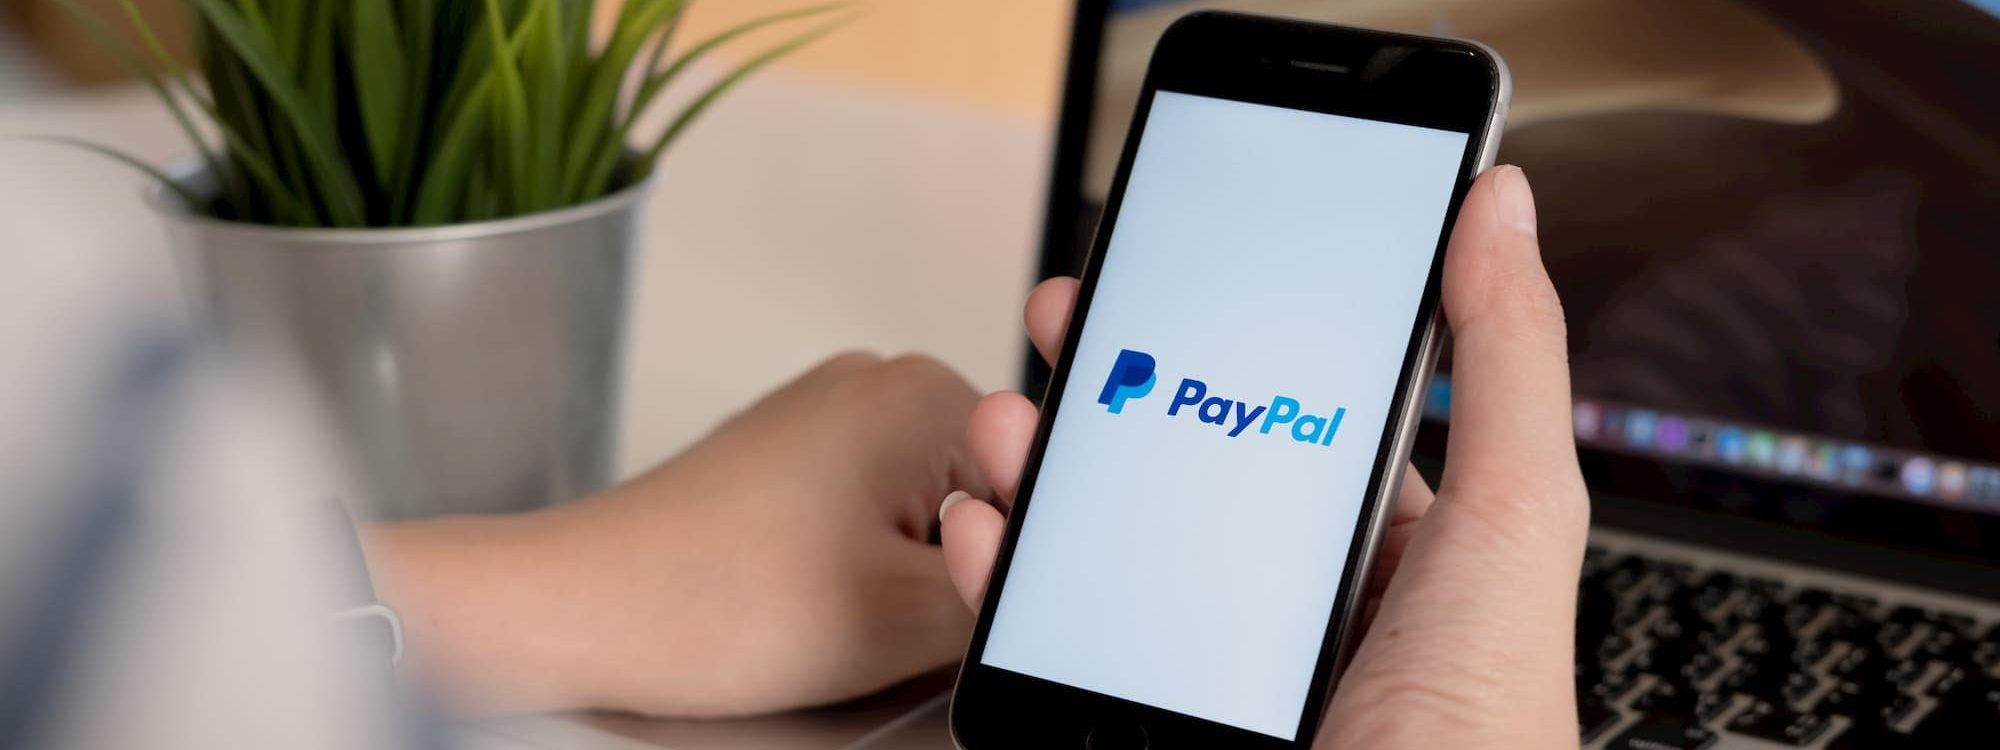 Person opening the PayPal app on phone